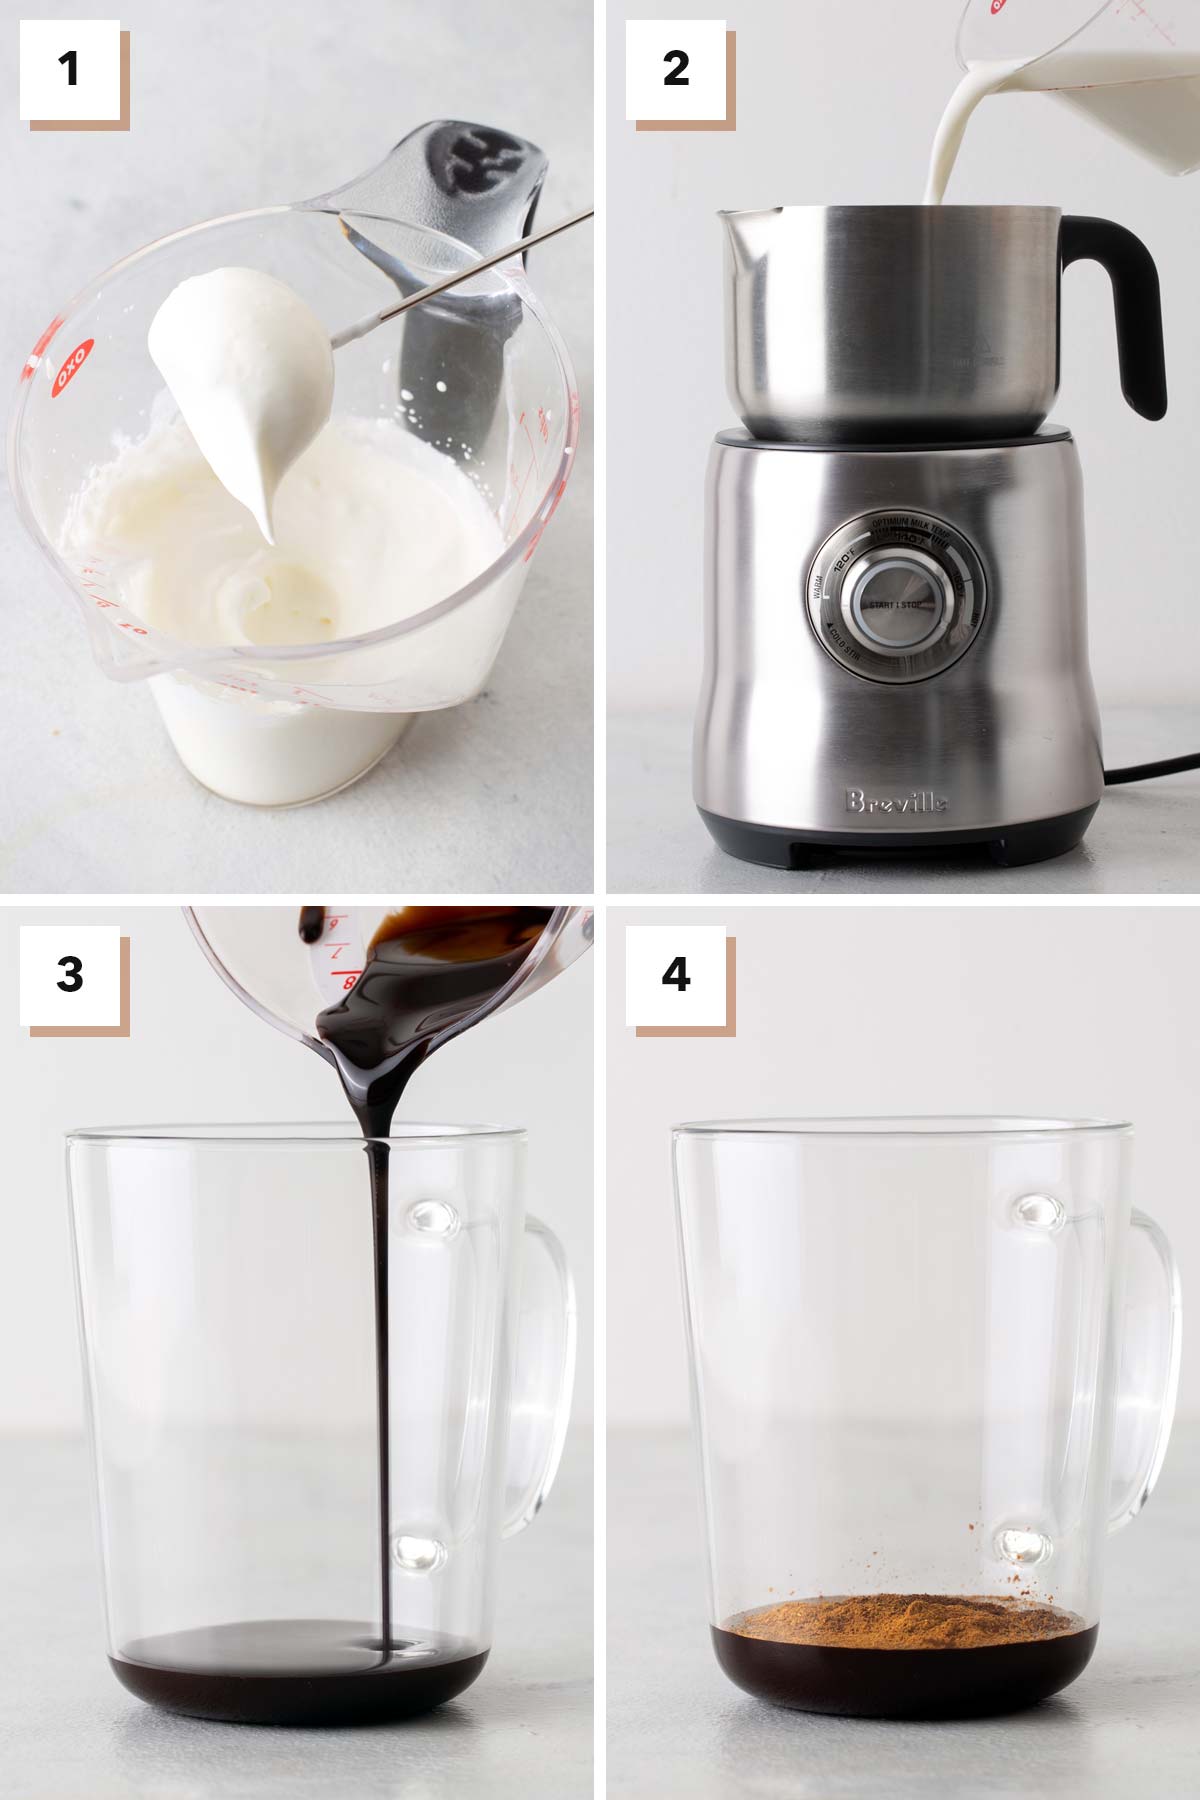 Steps to make Mexican hot chocolate.